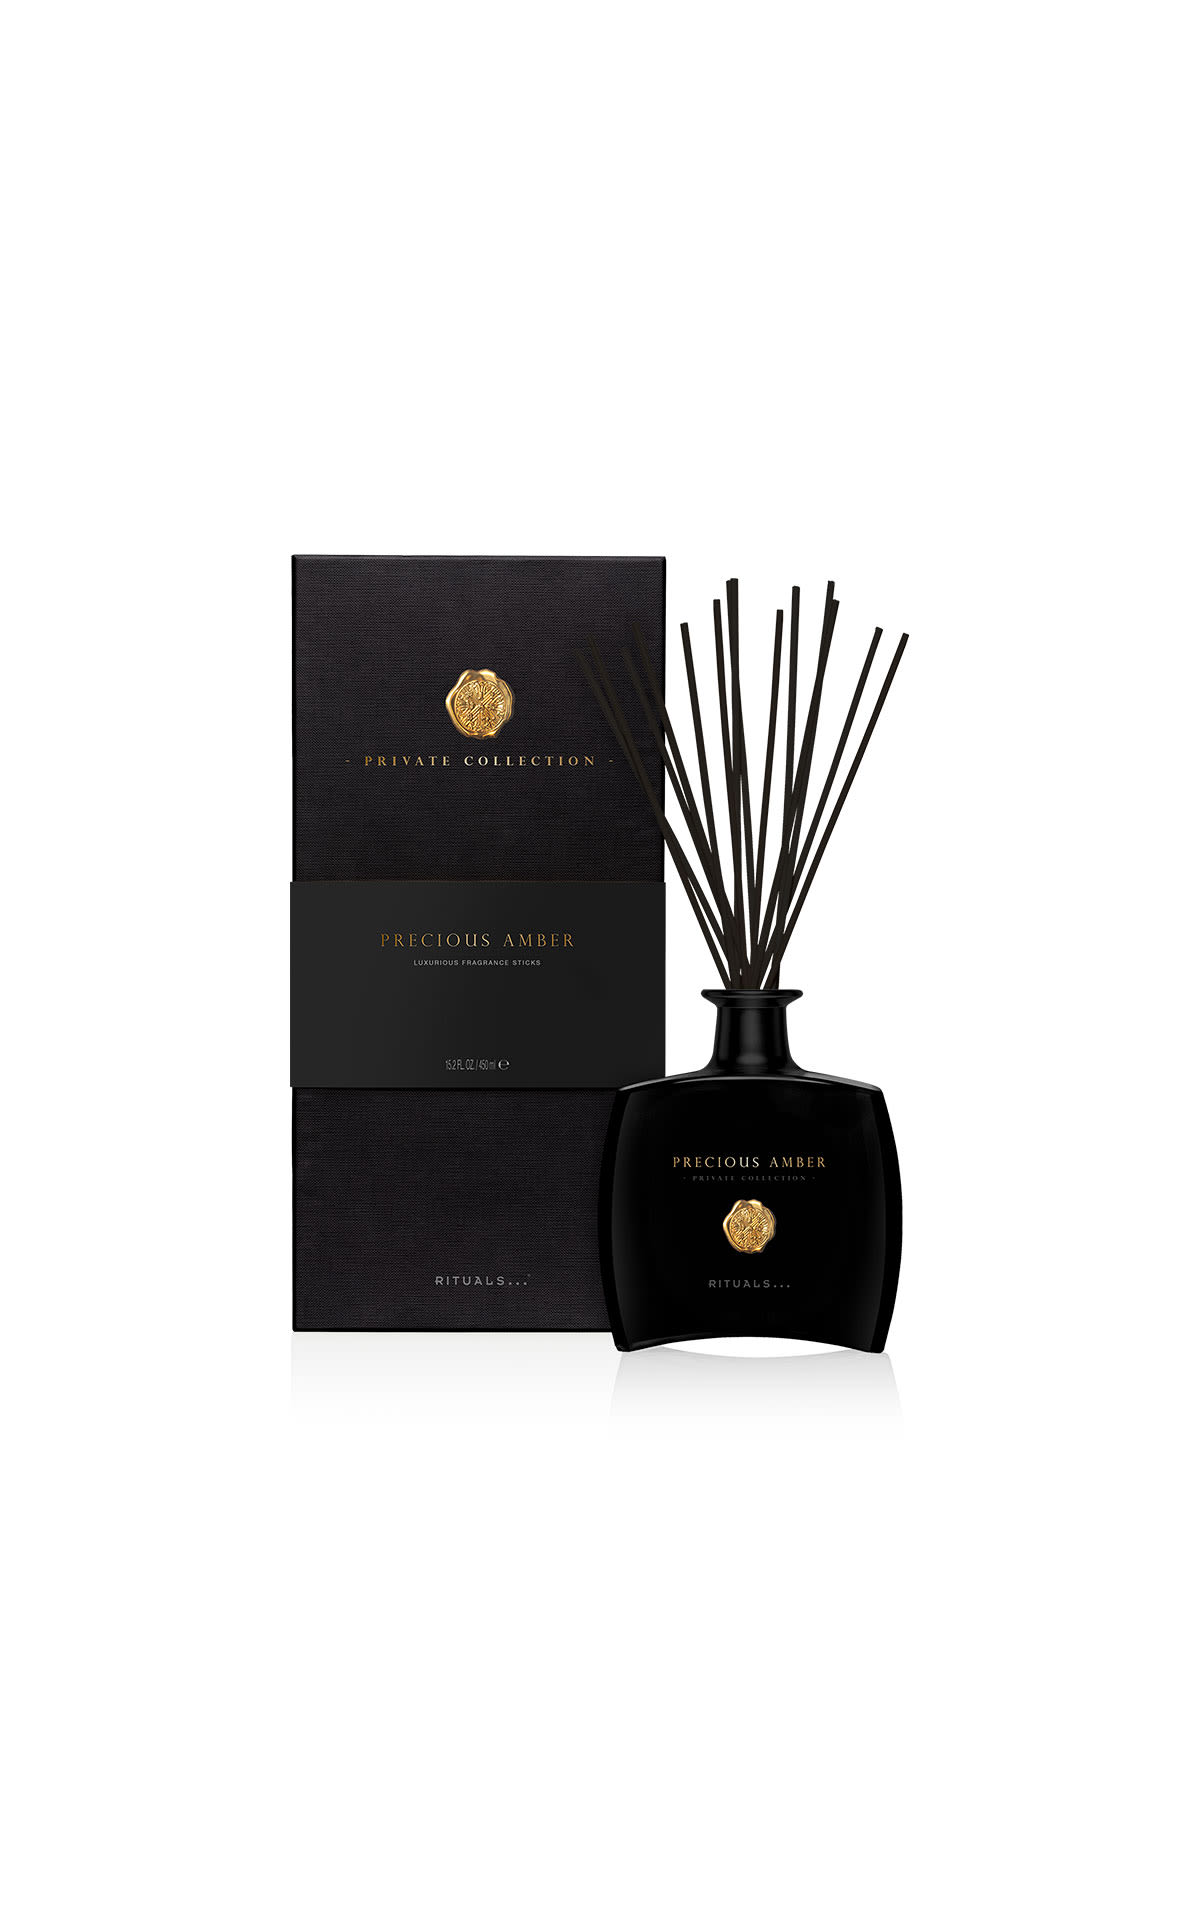 Rituals Private collection precious amber fragrance sticks from Bicester Village